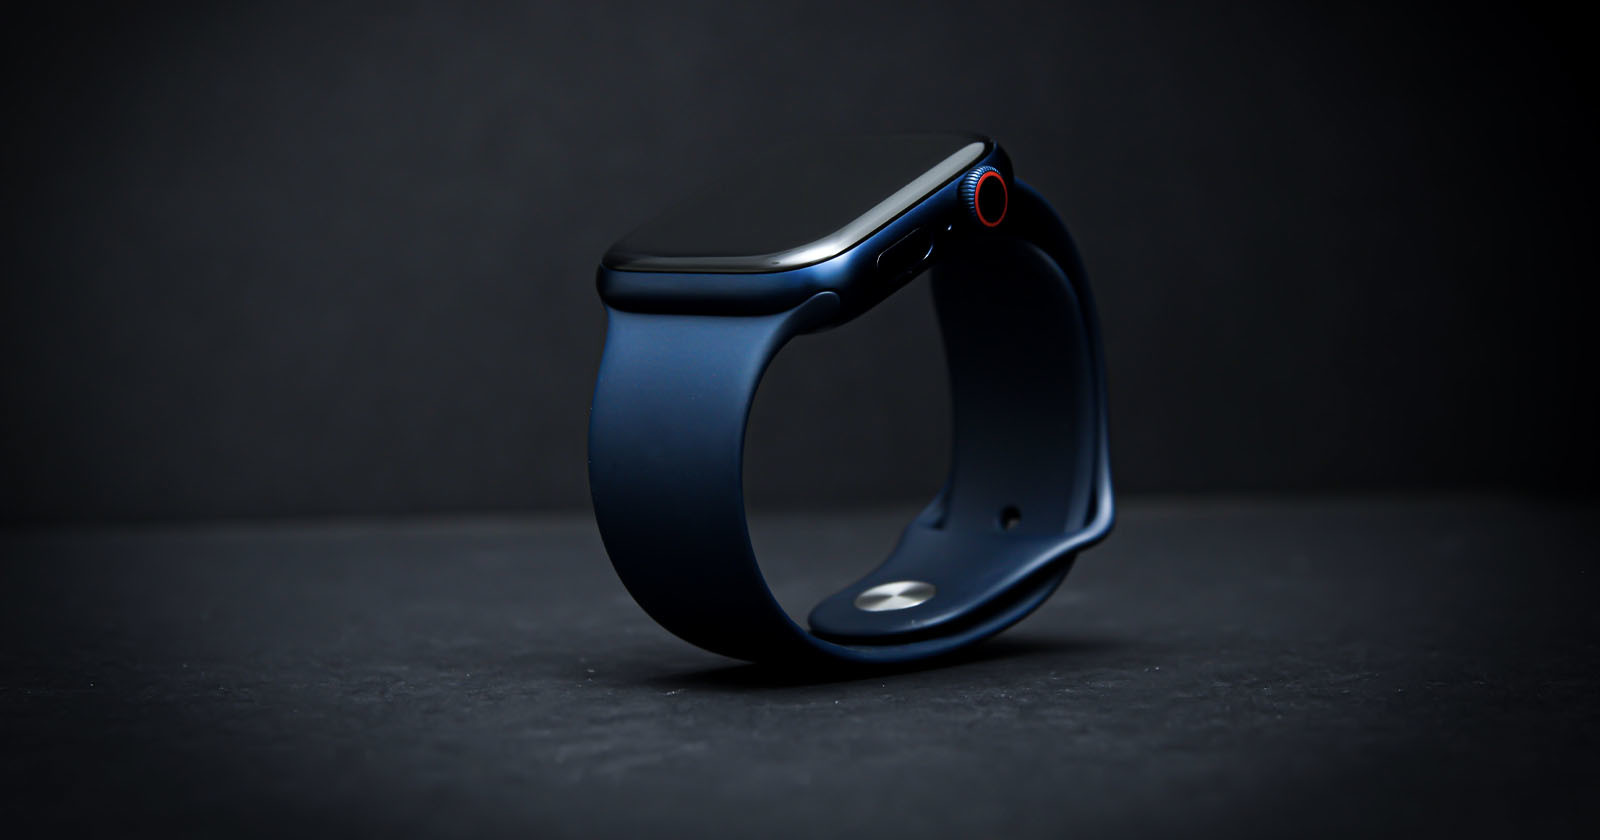 Apple Has Designed a Detachable Watch with a Built-In Camera